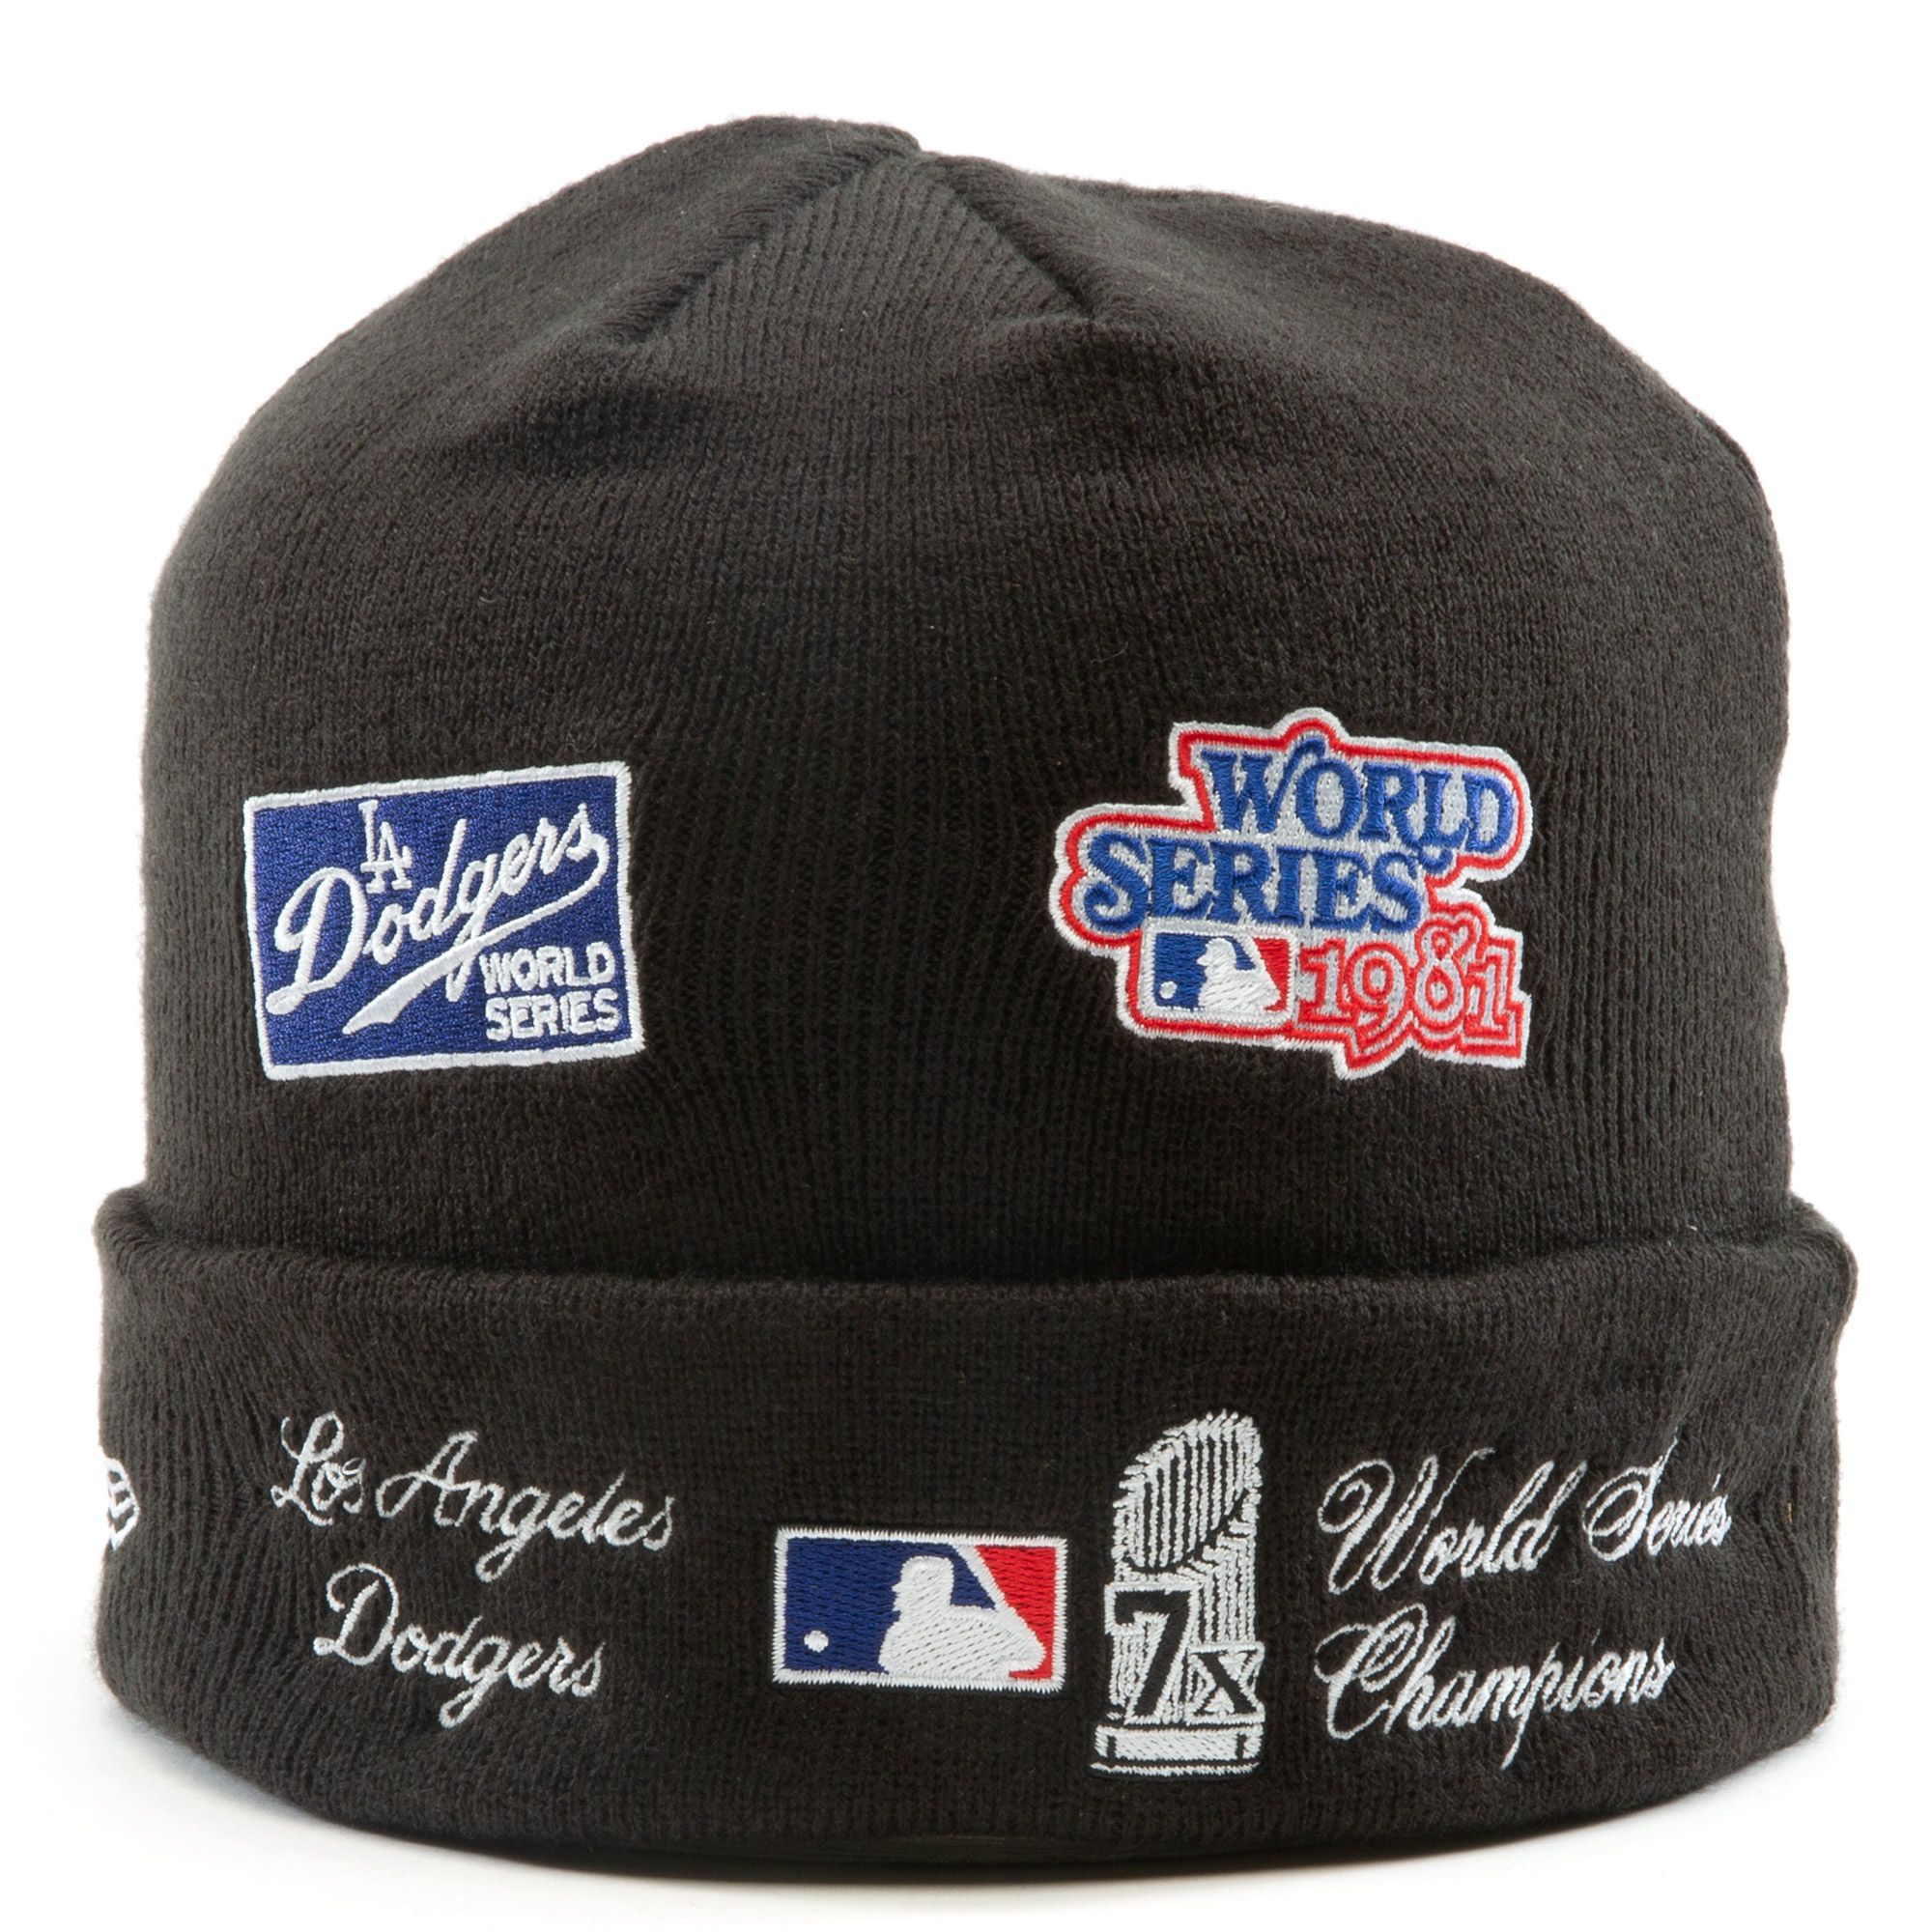 Los Angeles Dodgers 1955 World Series Embroidered Patch – THE 4TH